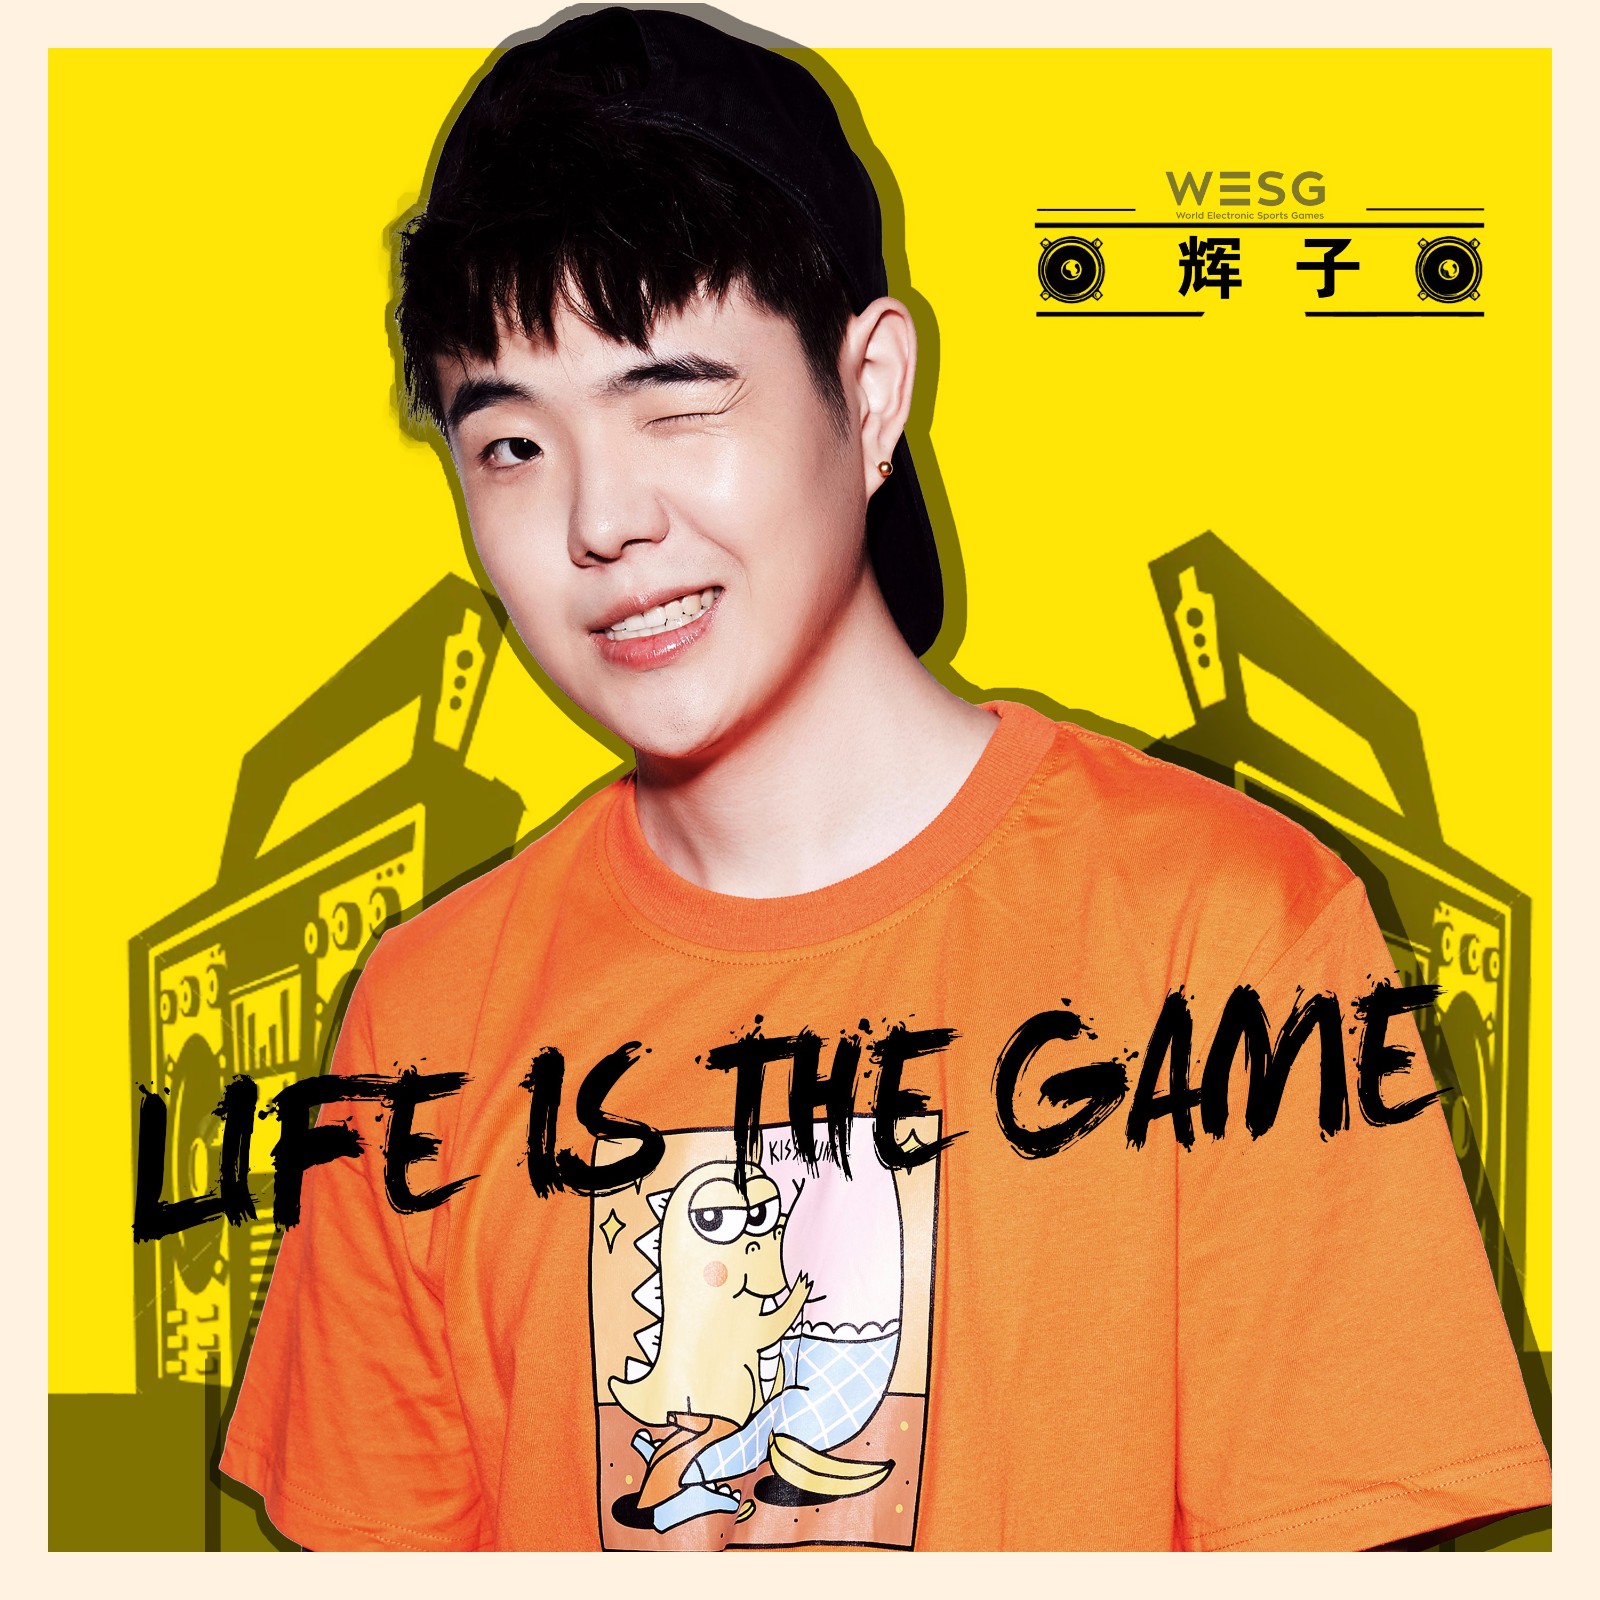 Life is The Game_109951163019377181.jpg